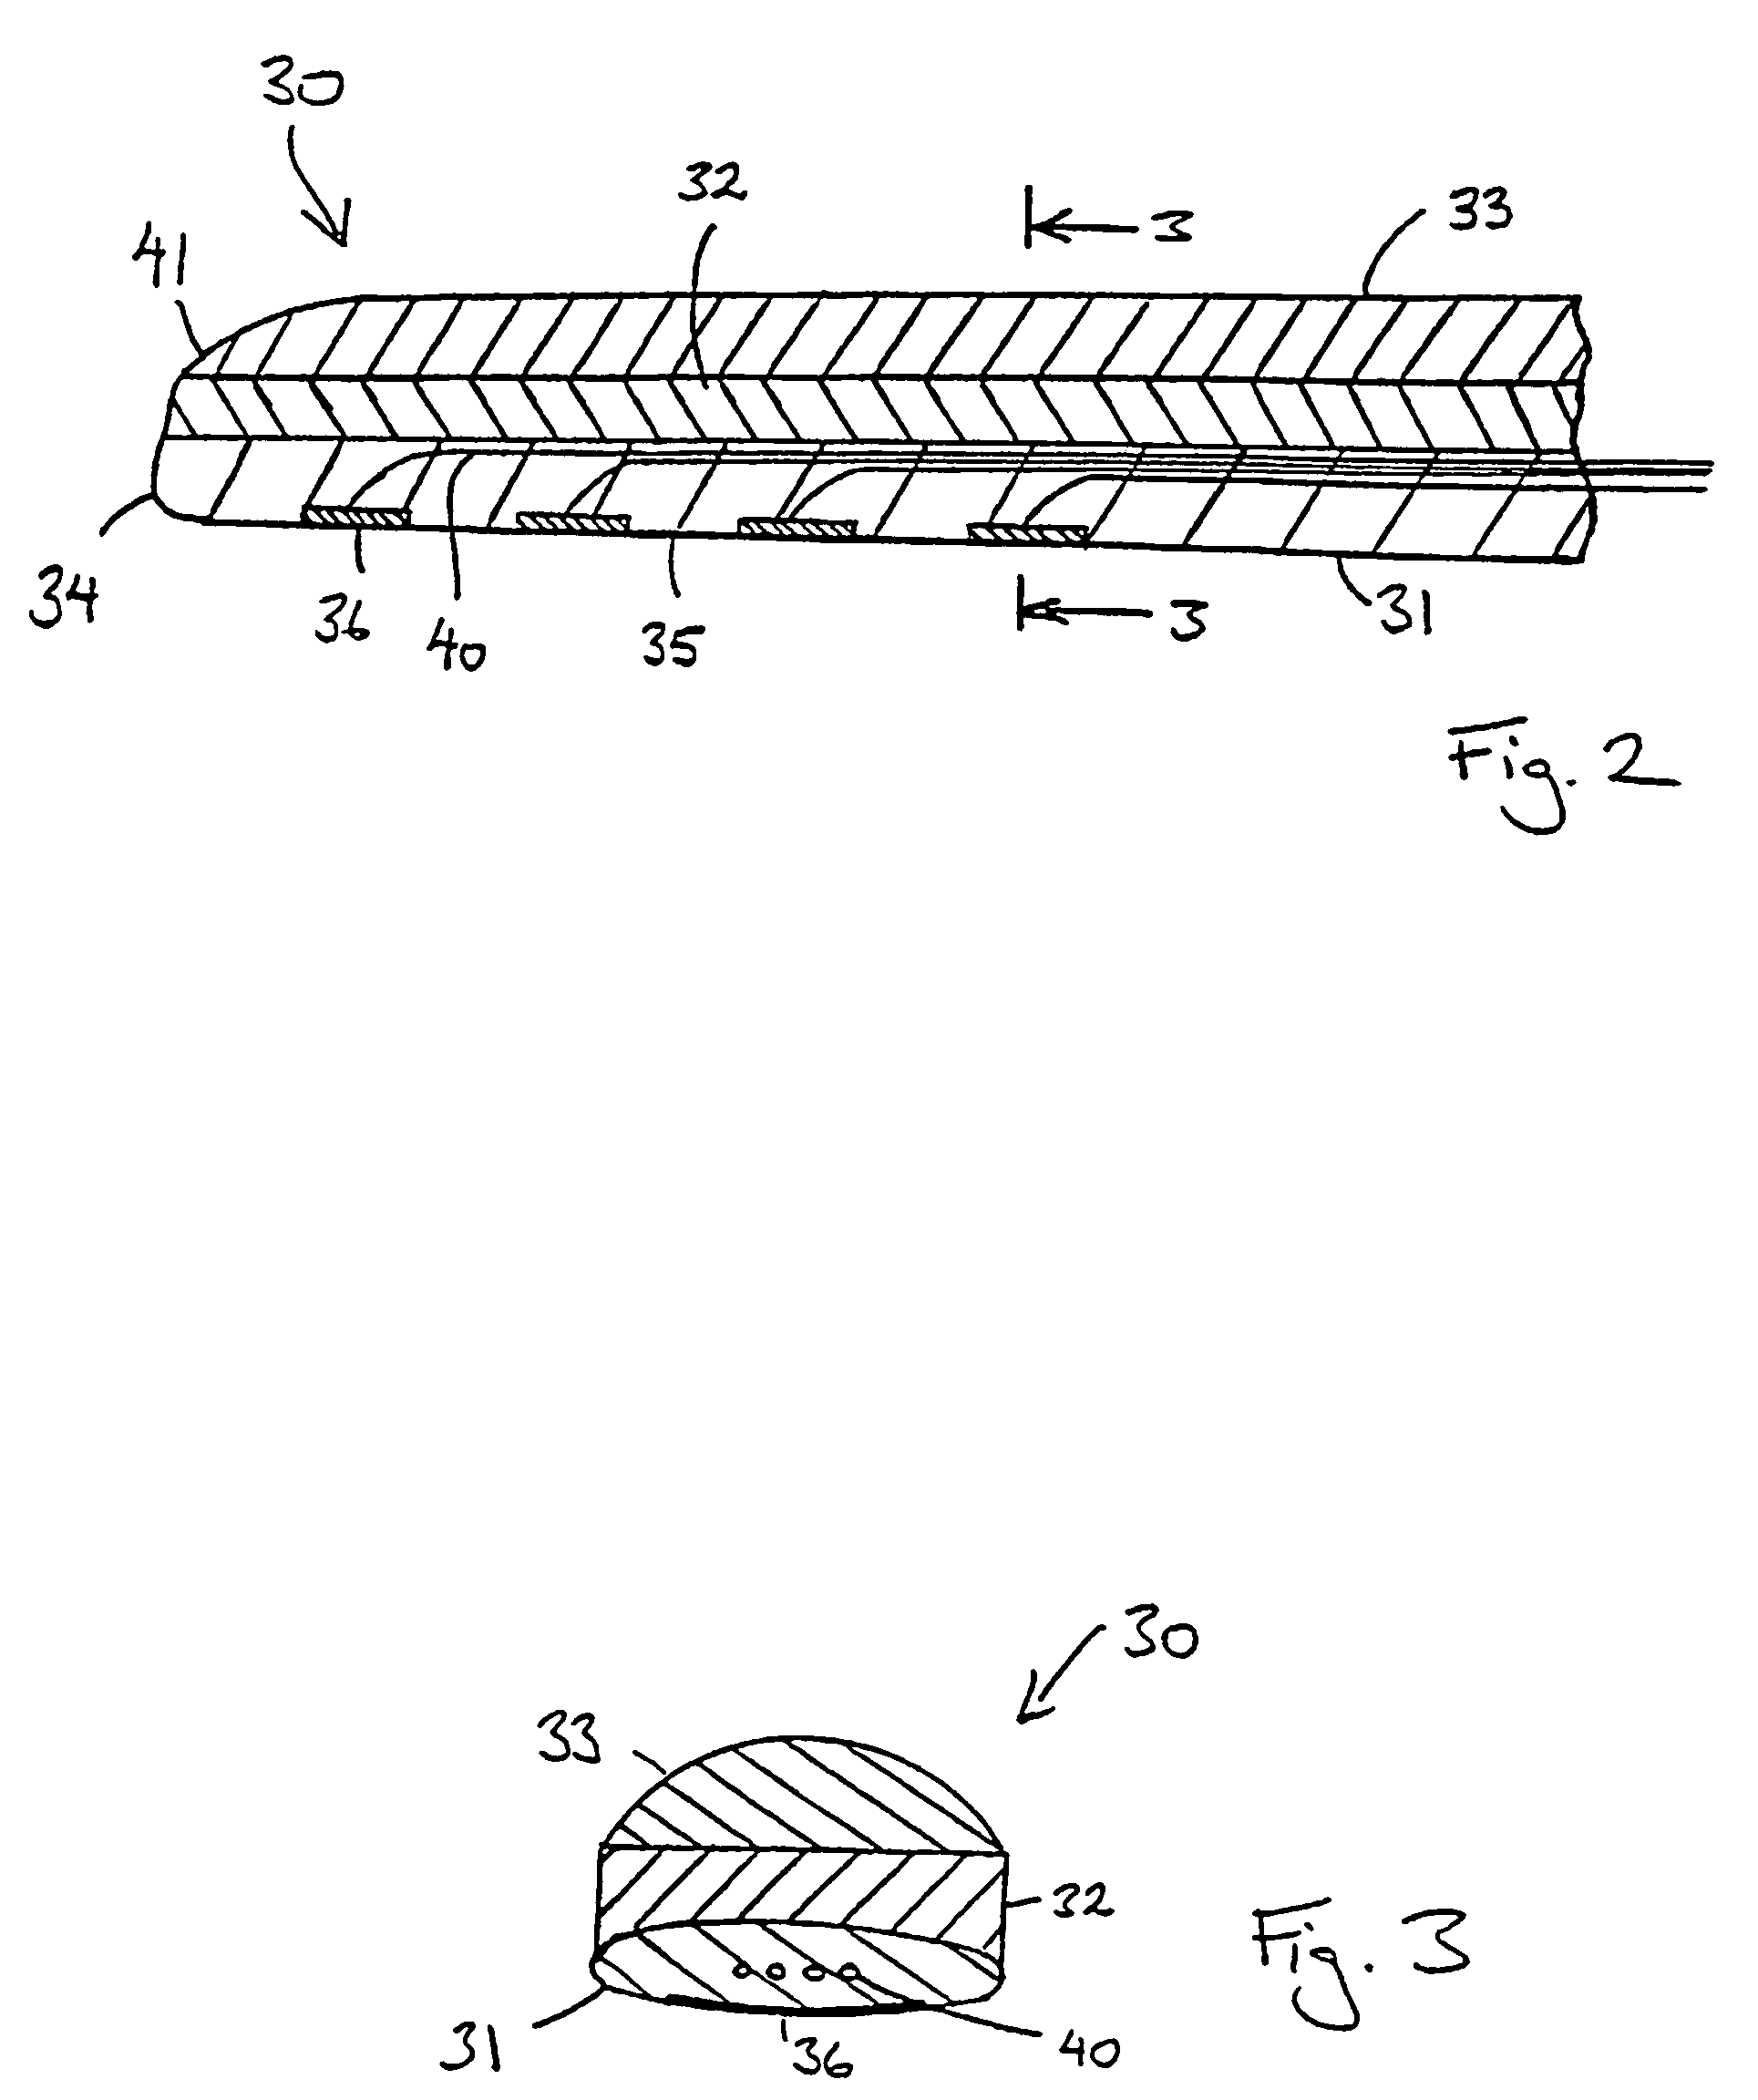 Laminated electrode for a cochlear implant